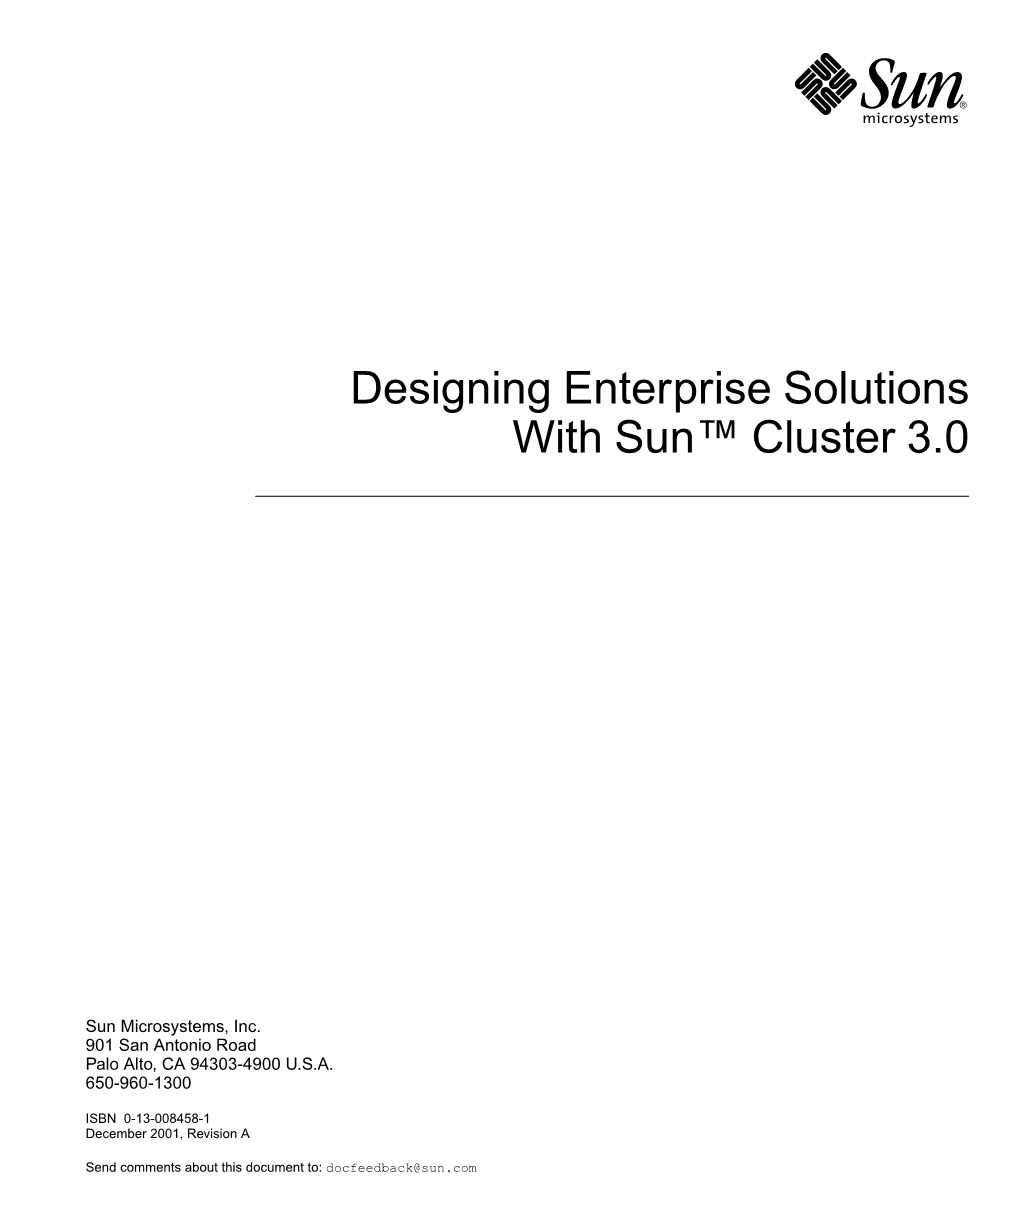 Designing Enterprise Solutions with Sun™ Cluster 3.0